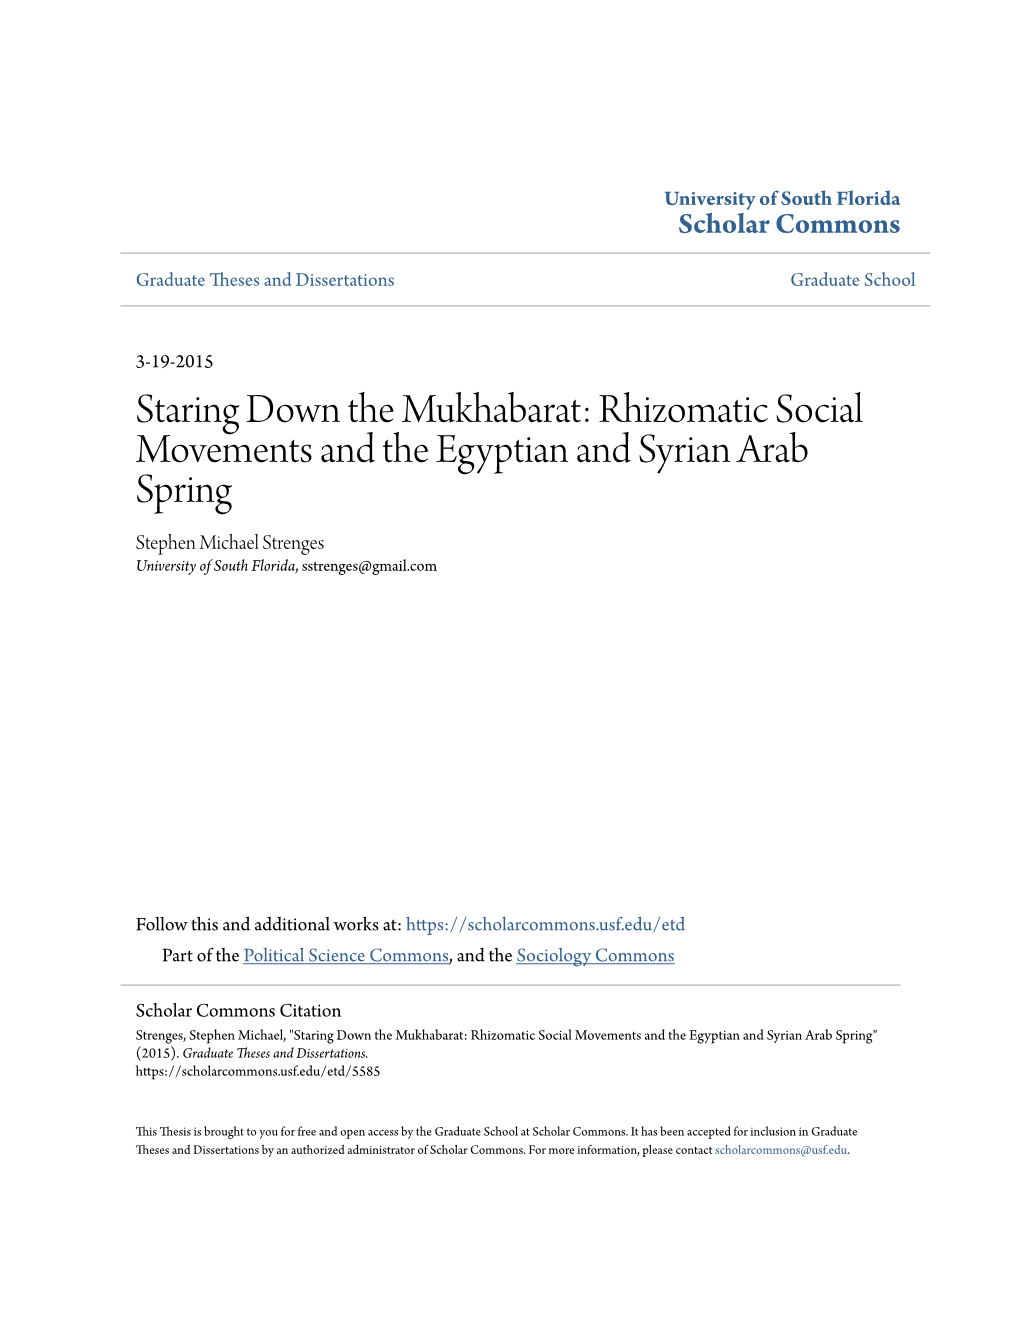 Rhizomatic Social Movements and the Egyptian and Syrian Arab Spring Stephen Michael Strenges University of South Florida, Sstrenges@Gmail.Com